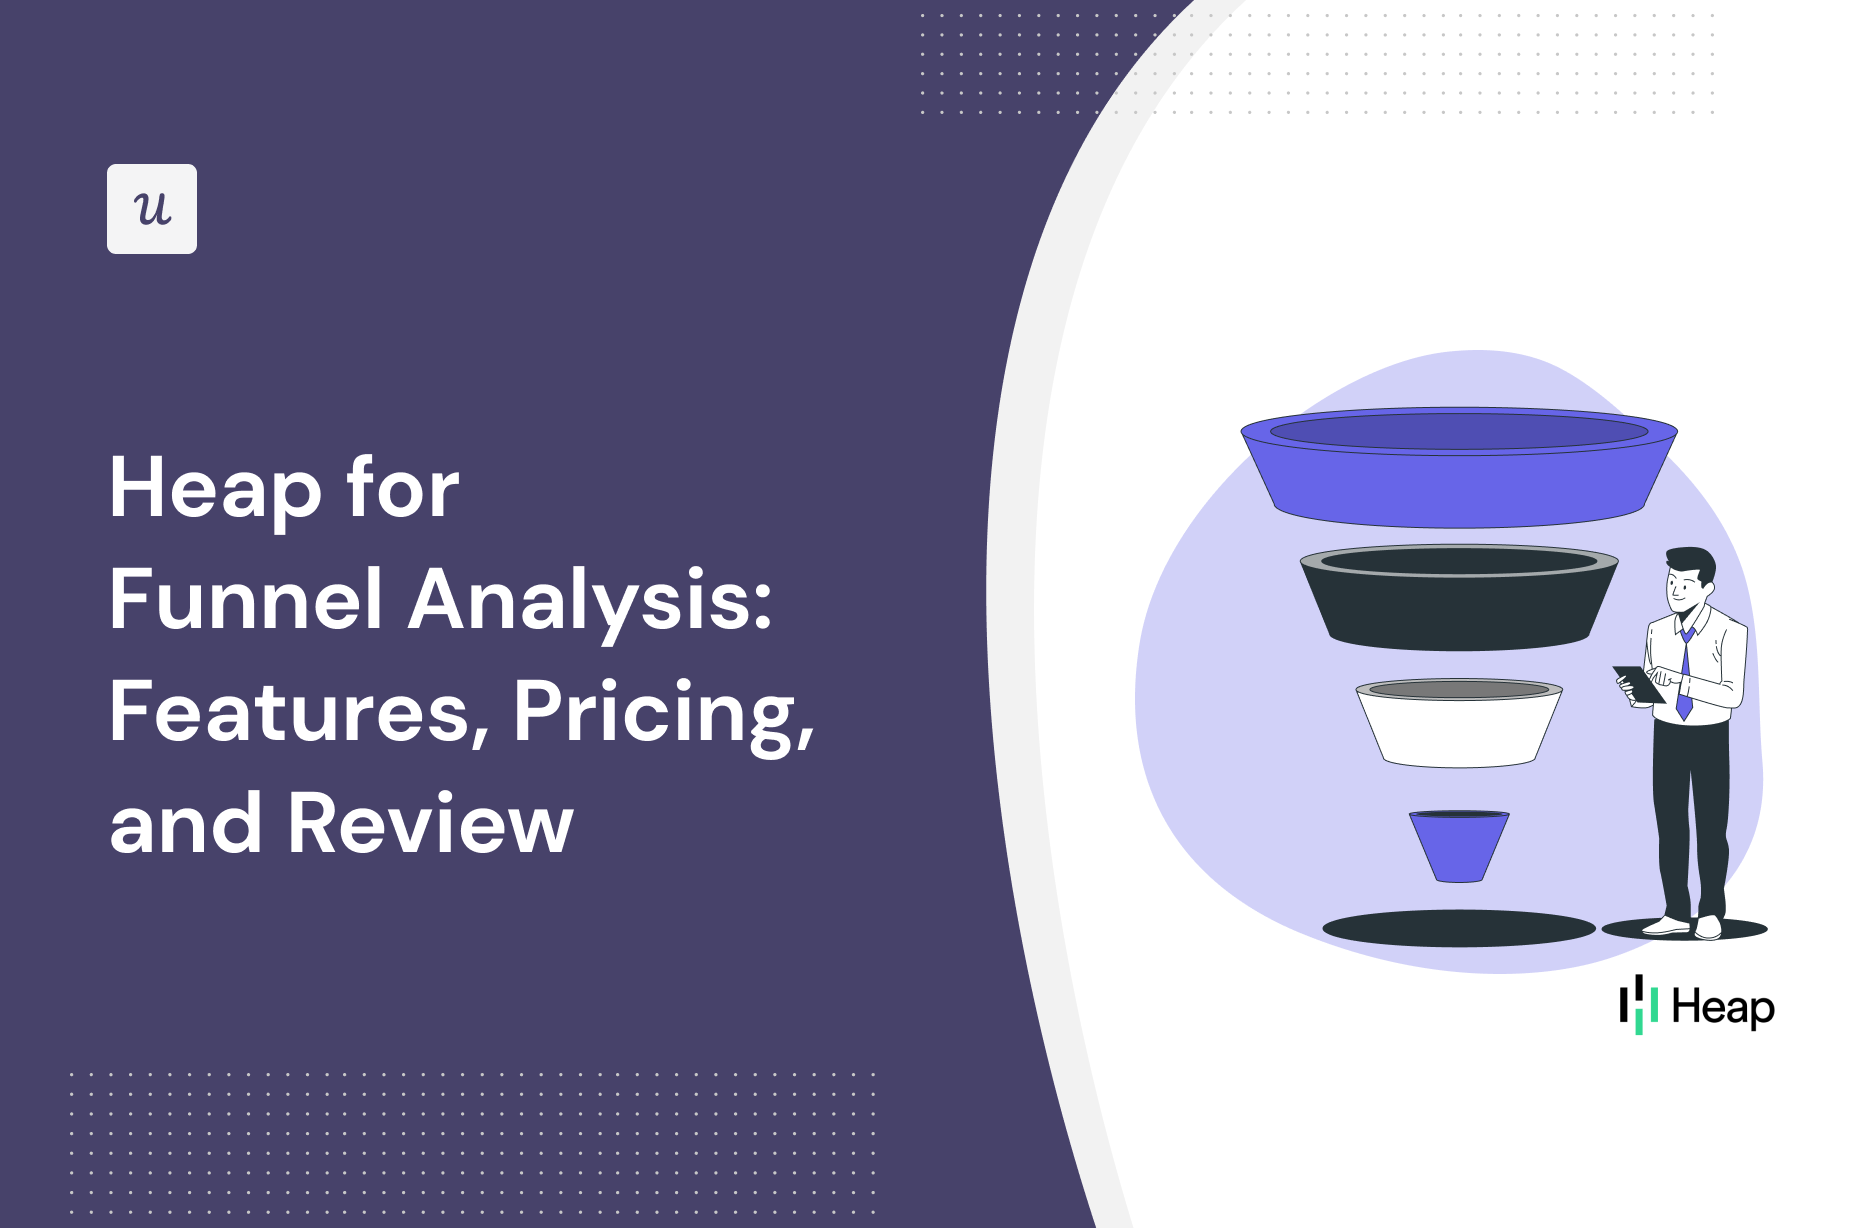 Heap for Funnel Analysis: Features, Pricing, and Review